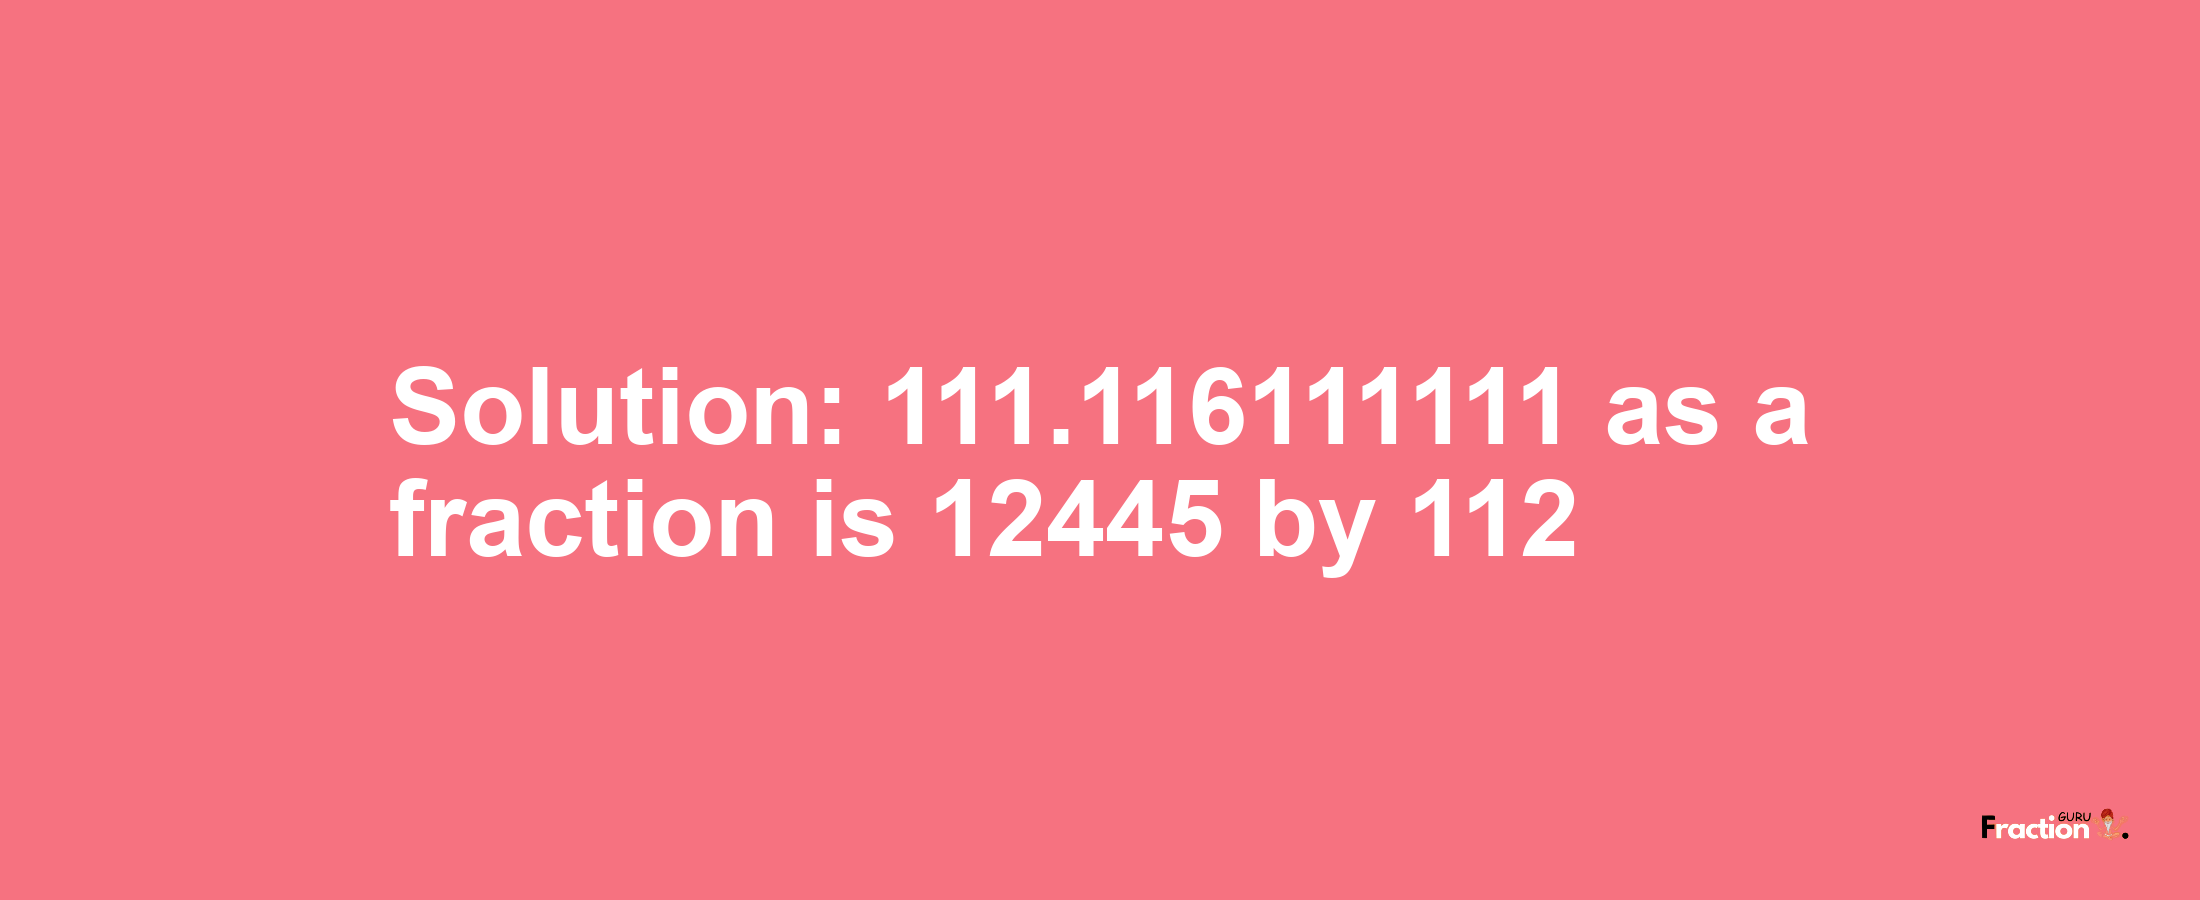 Solution:111.116111111 as a fraction is 12445/112